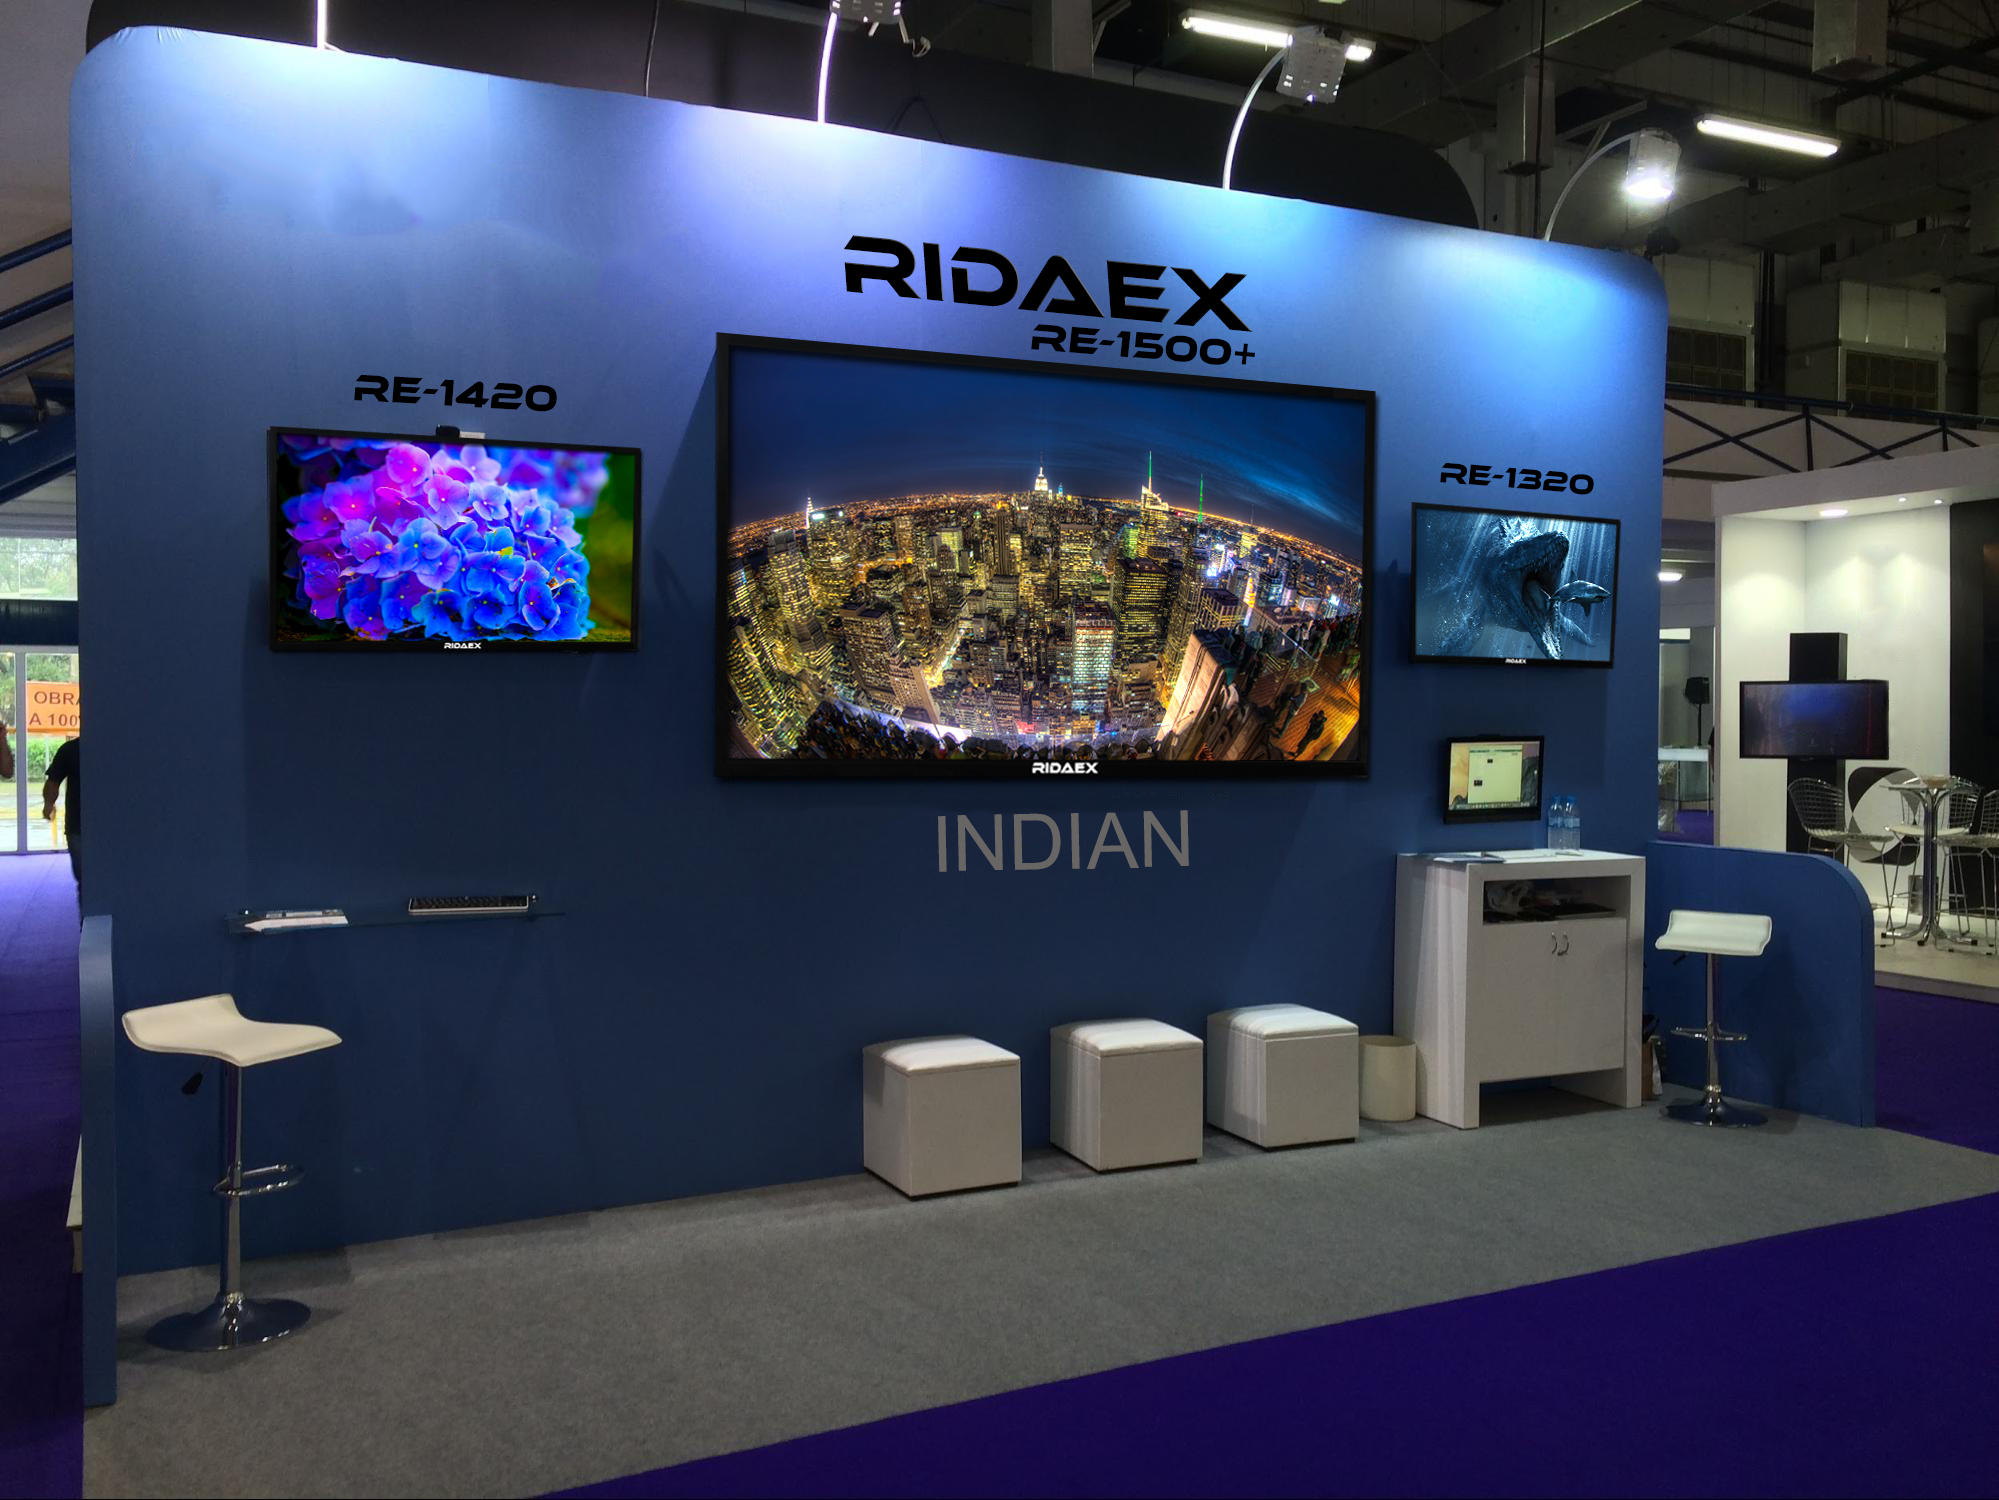 RIDAEX, The Indian player conquering the new gen smart TV market introduces RE PRO 2019 models 1